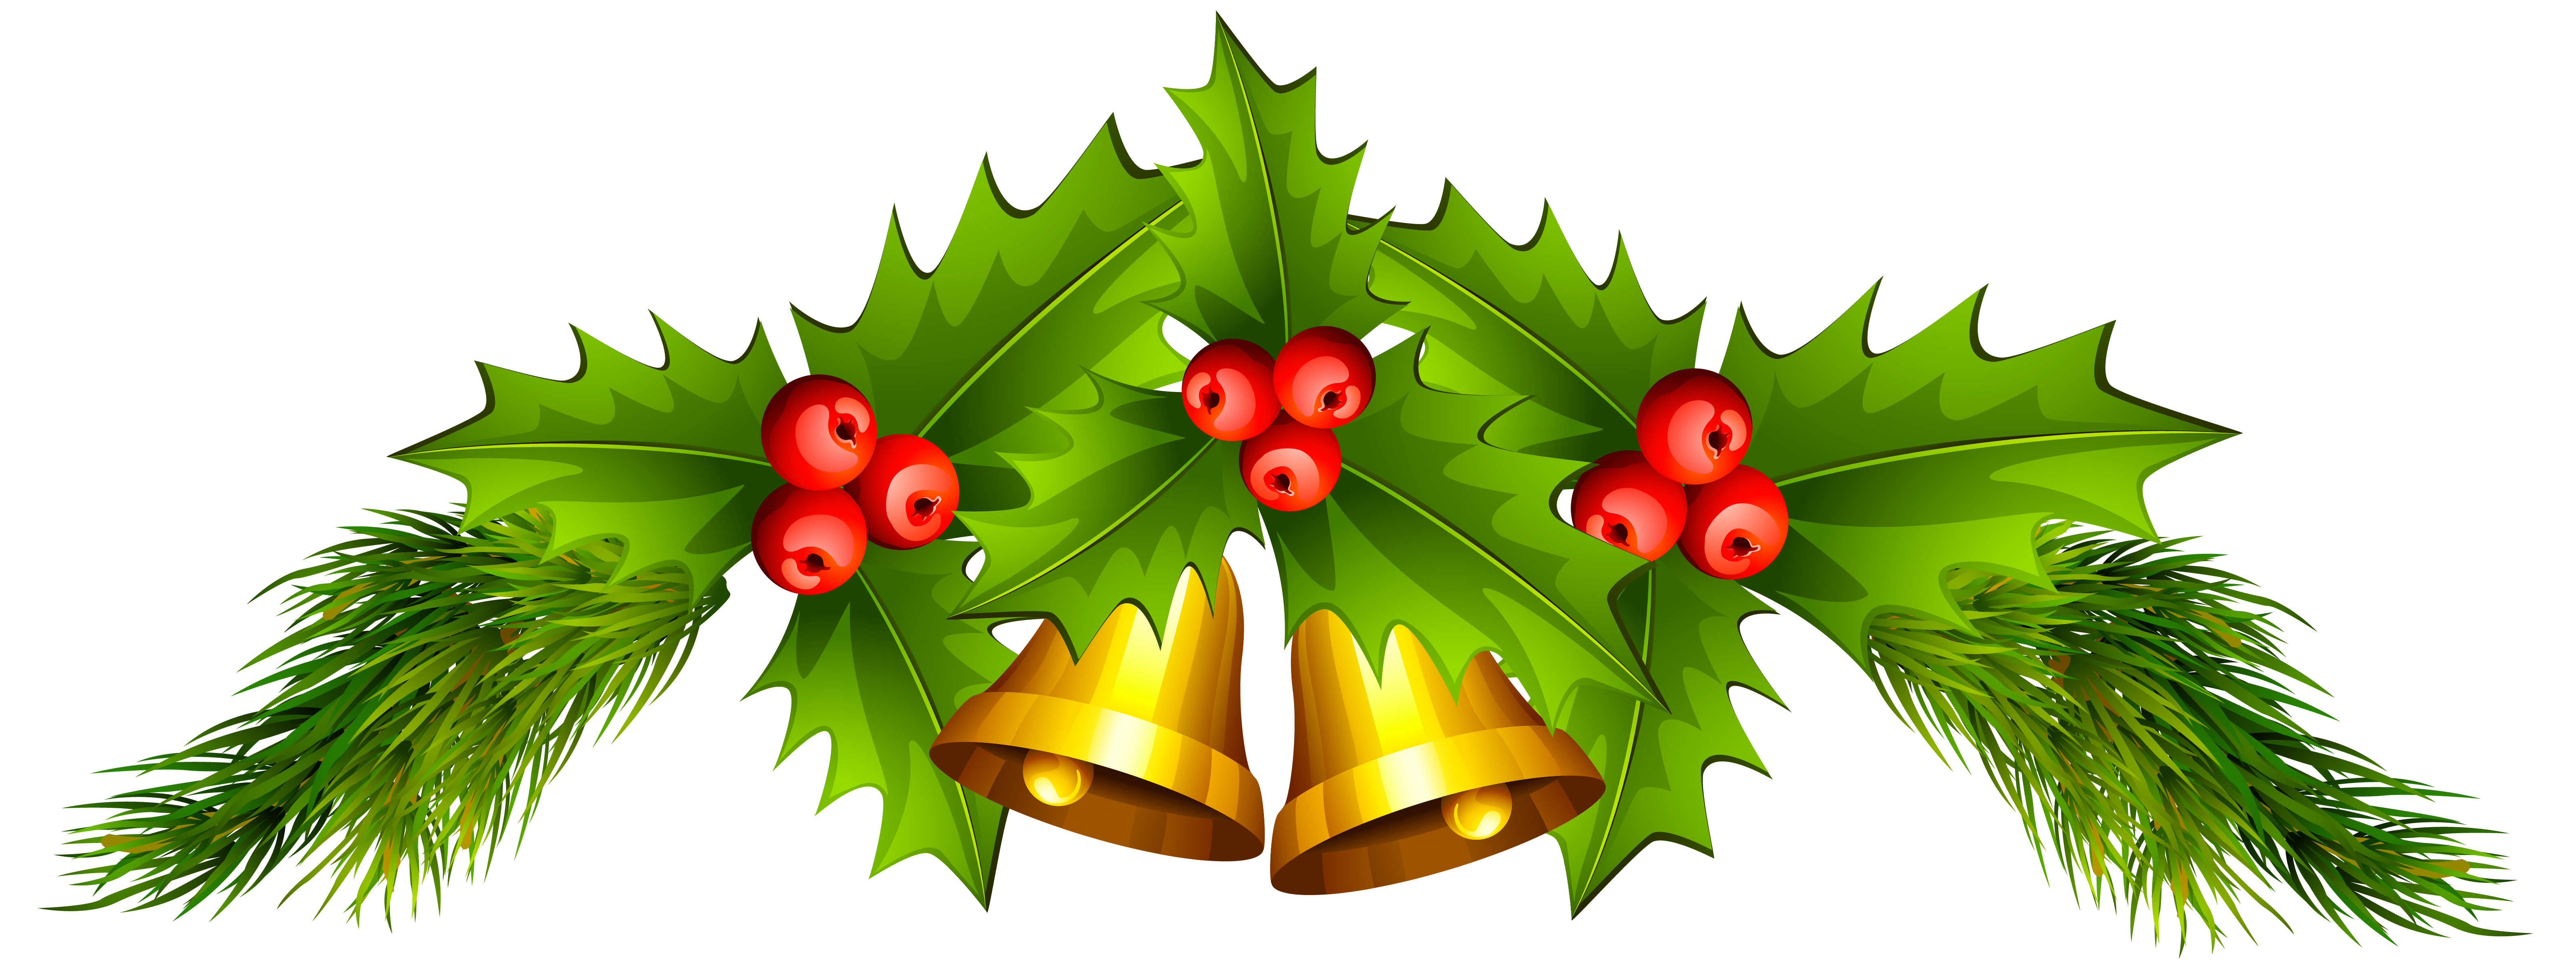 Christmas Bells PNG Clip Art Image Quality Image And Transparent PNG Free Clipart